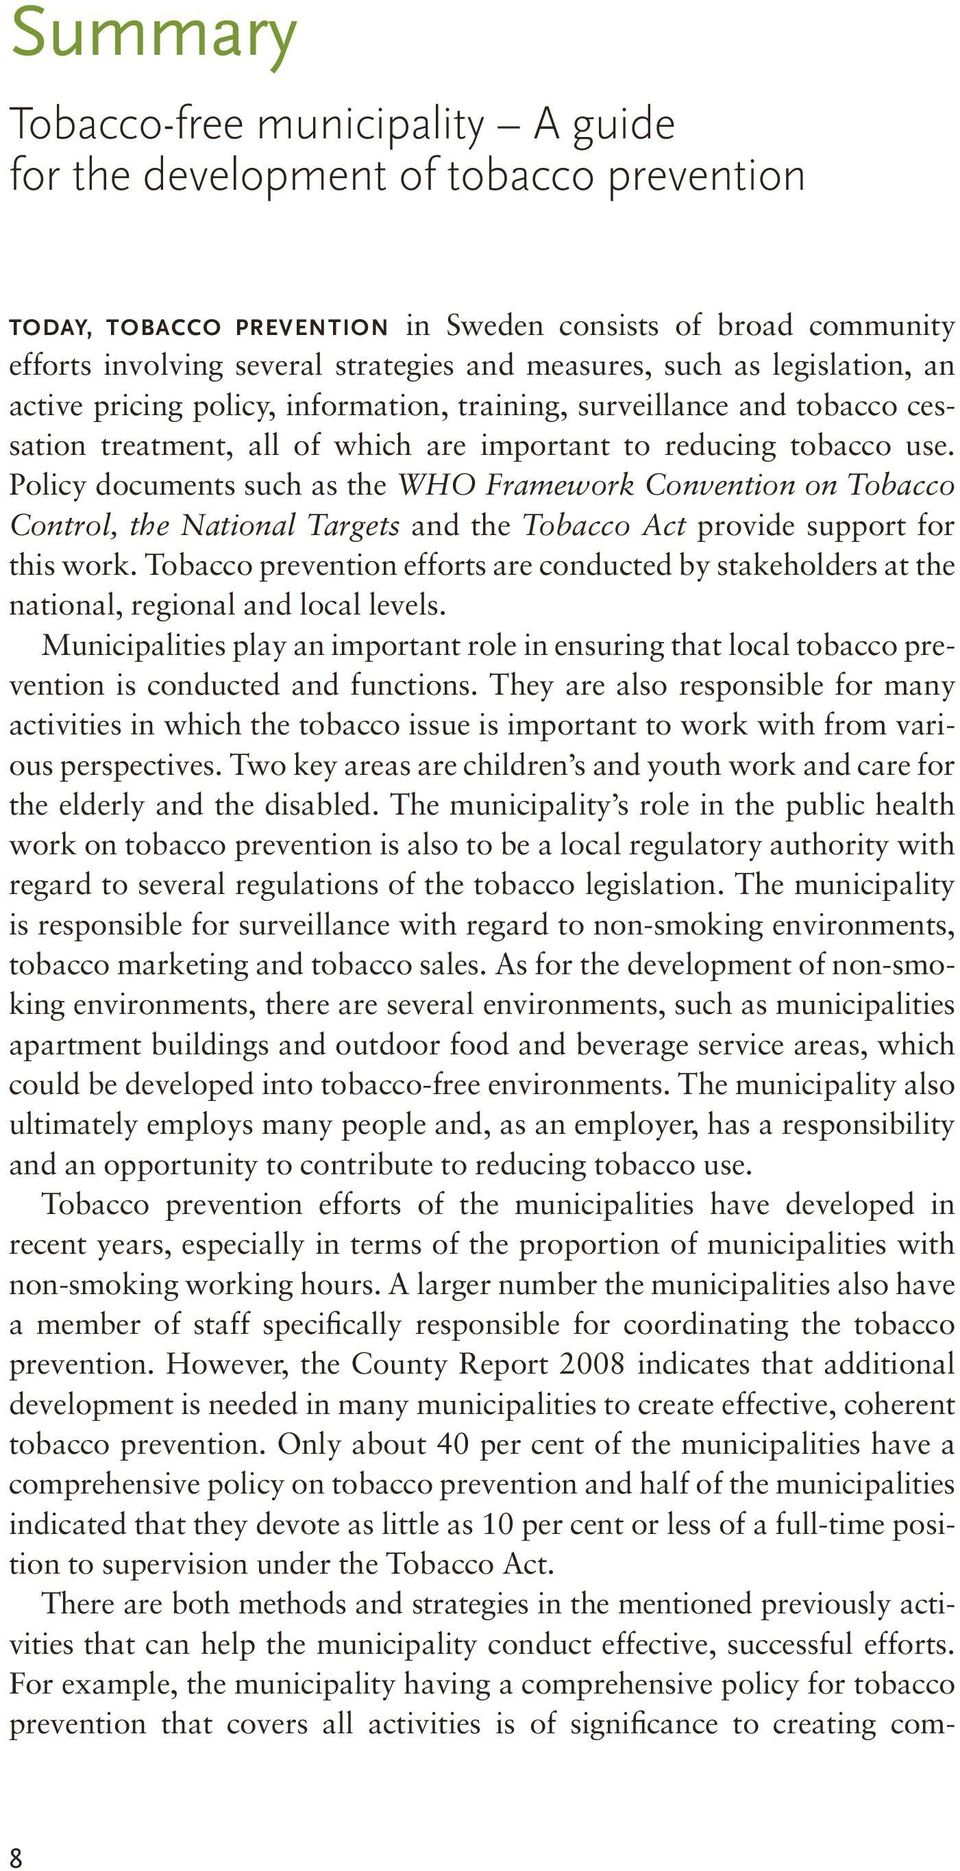 Policy documents such as the WHO Framework Convention on Tobacco Control, the National Targets and the Tobacco Act provide support for this work.